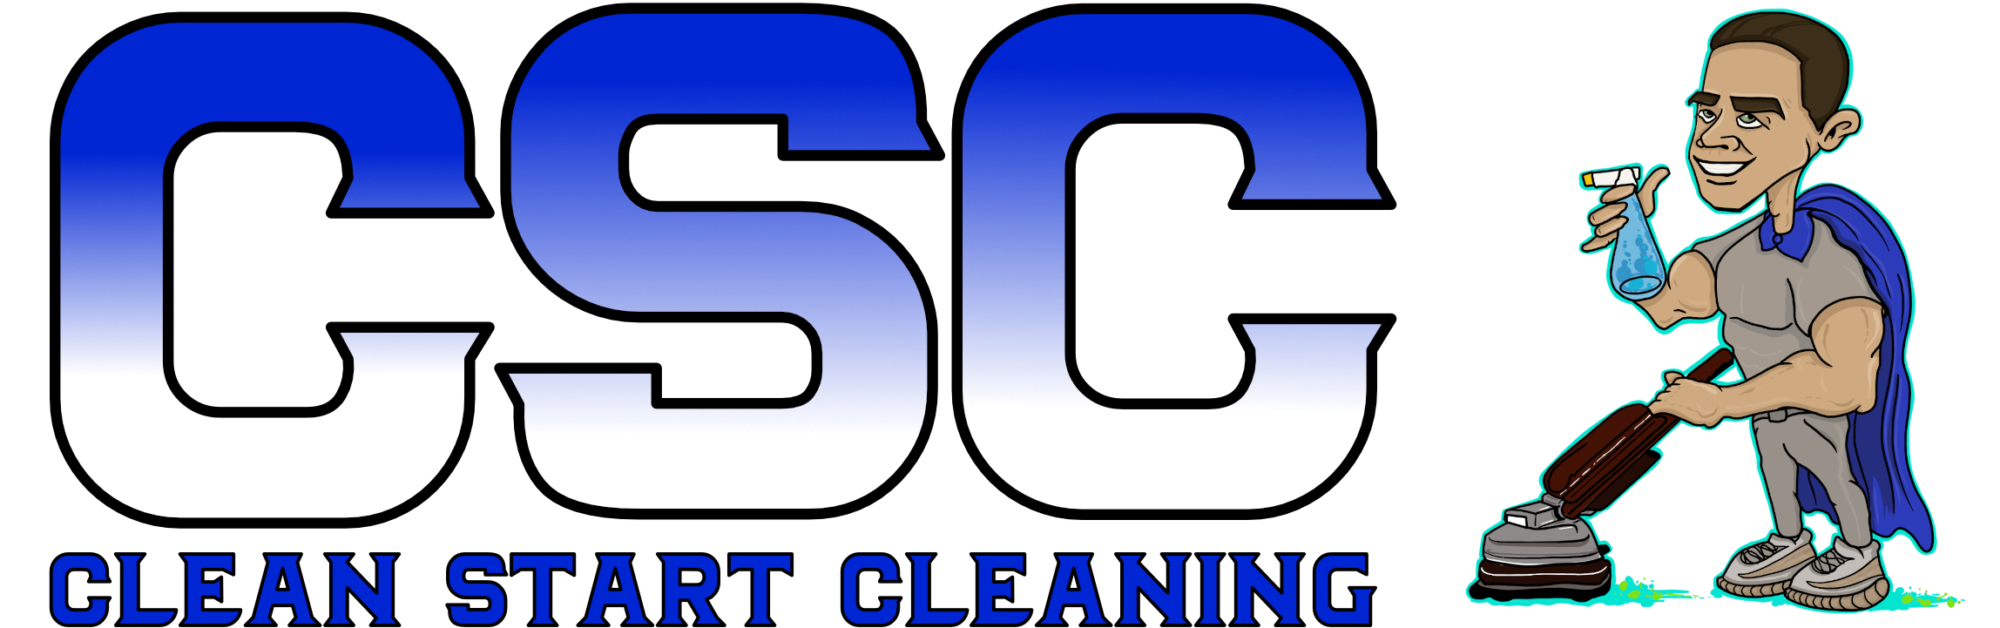 Clean Start Cleaning Service